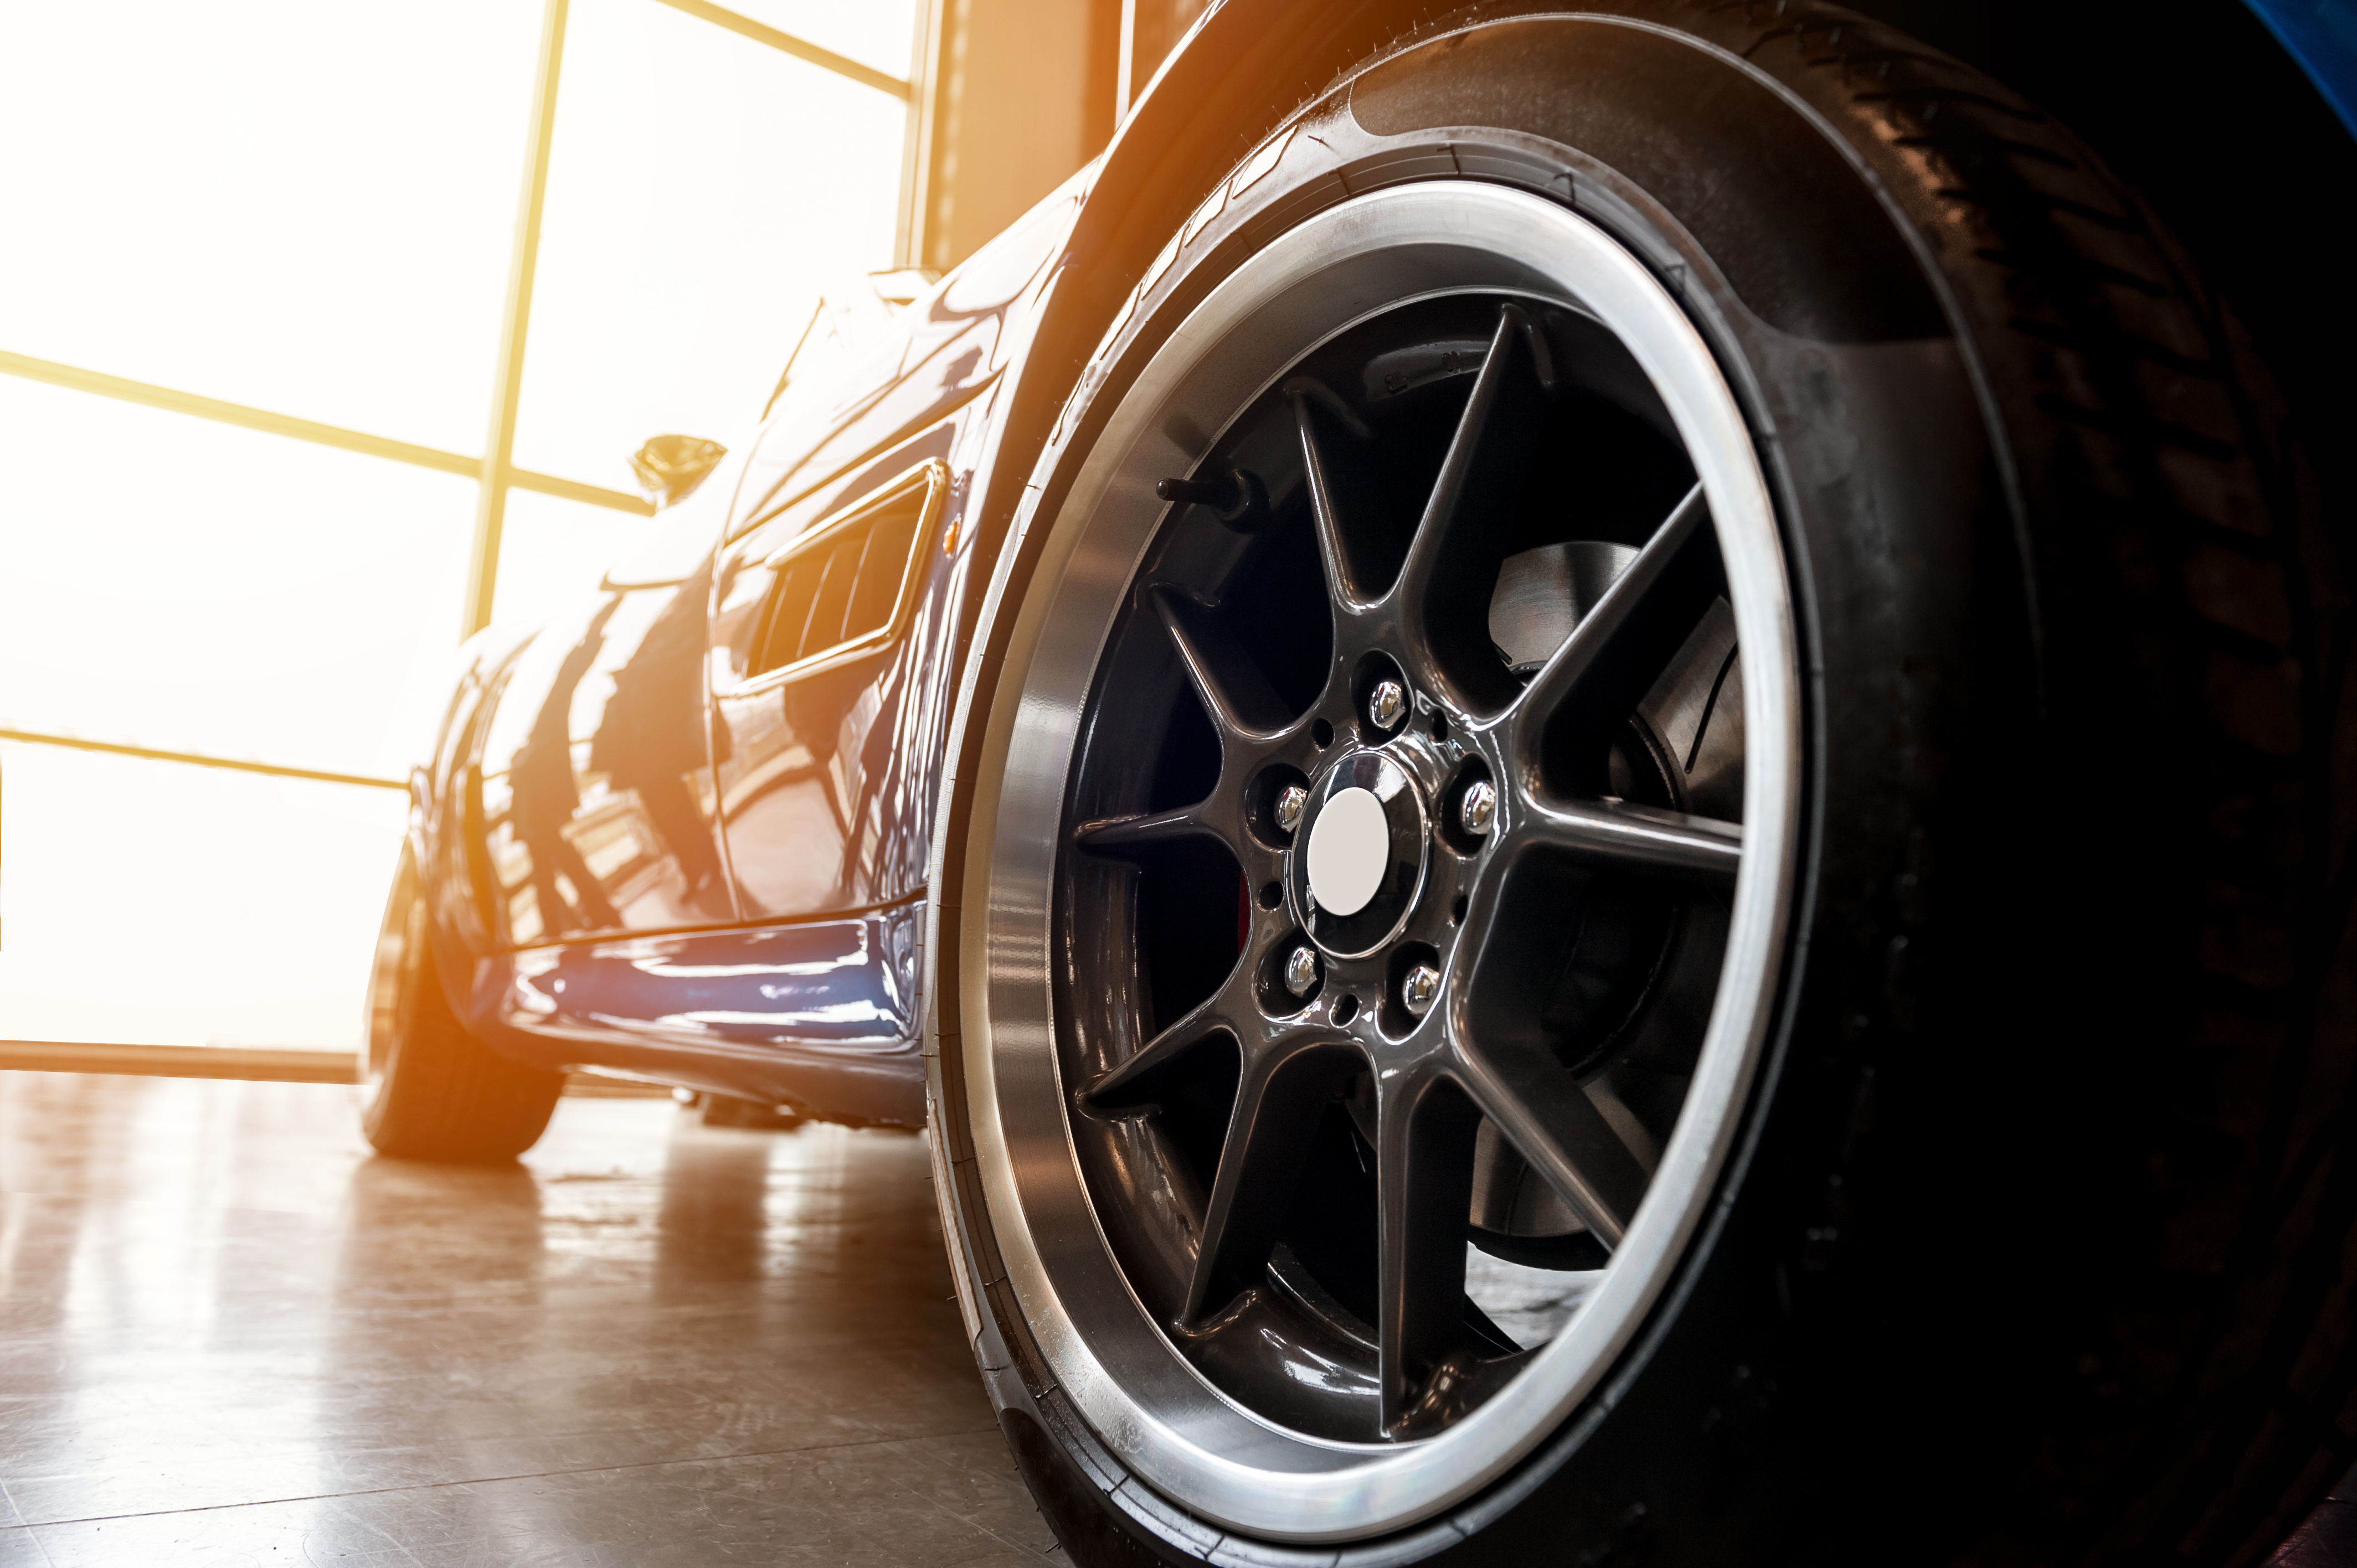 What Causes Bad Wheel Alignment?